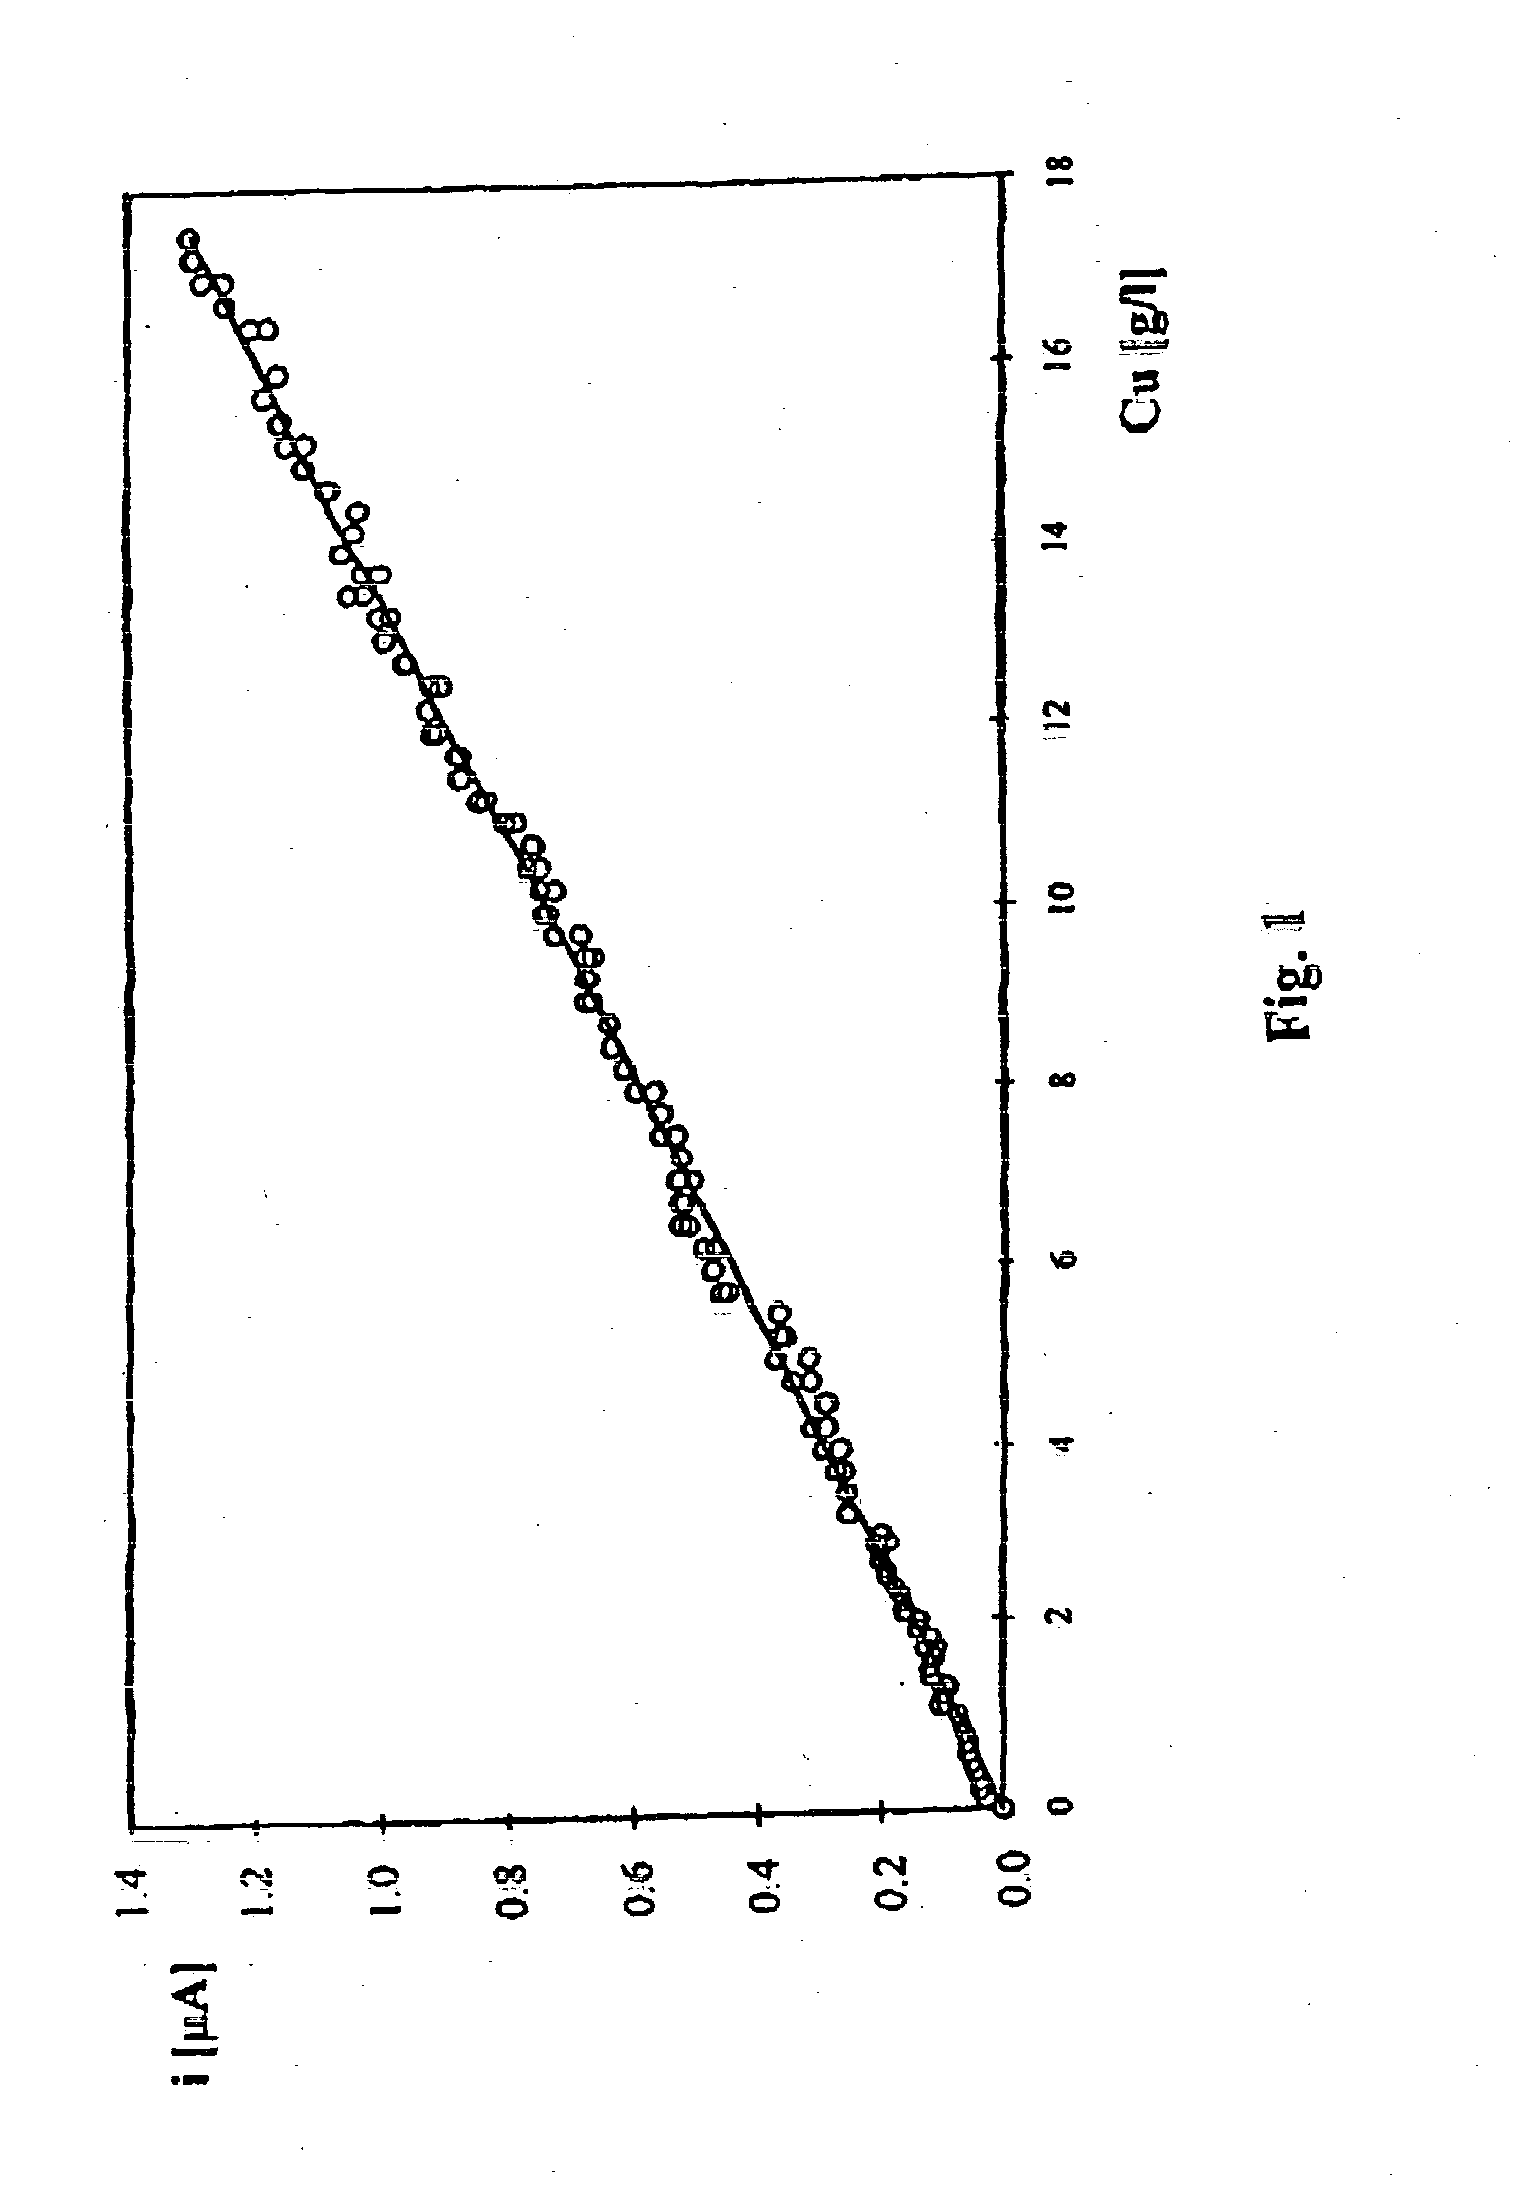 Method of measuring copper ion concentration in industrial electrolytes